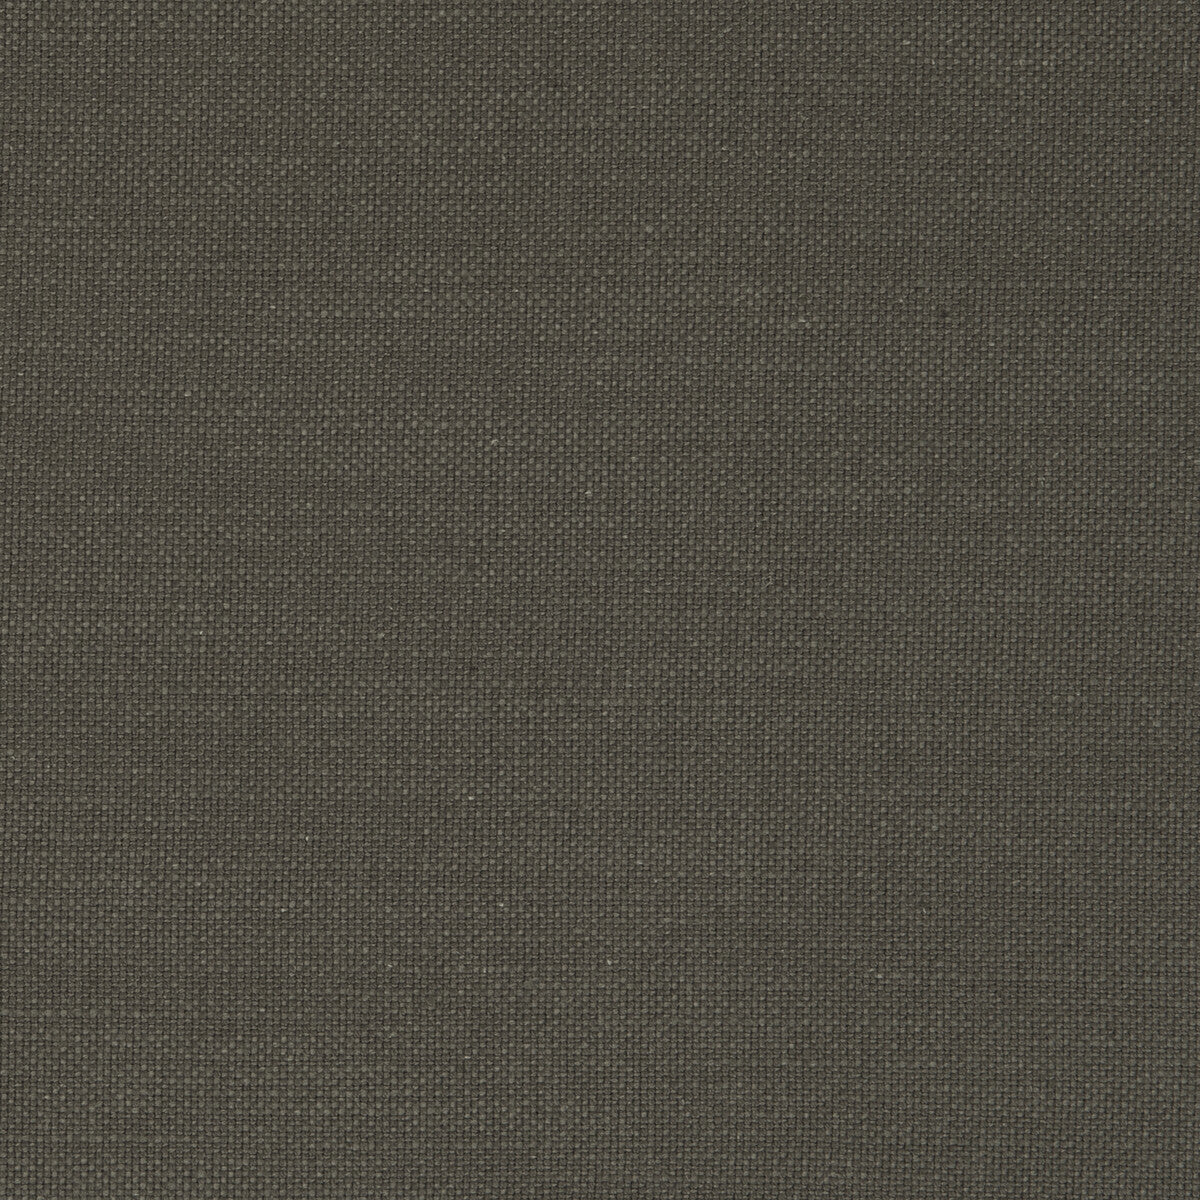 Nantucket fabric in gunmetal color - pattern F0594/23.CAC.0 - by Clarke And Clarke in the Clarke &amp; Clarke Nantucket collection